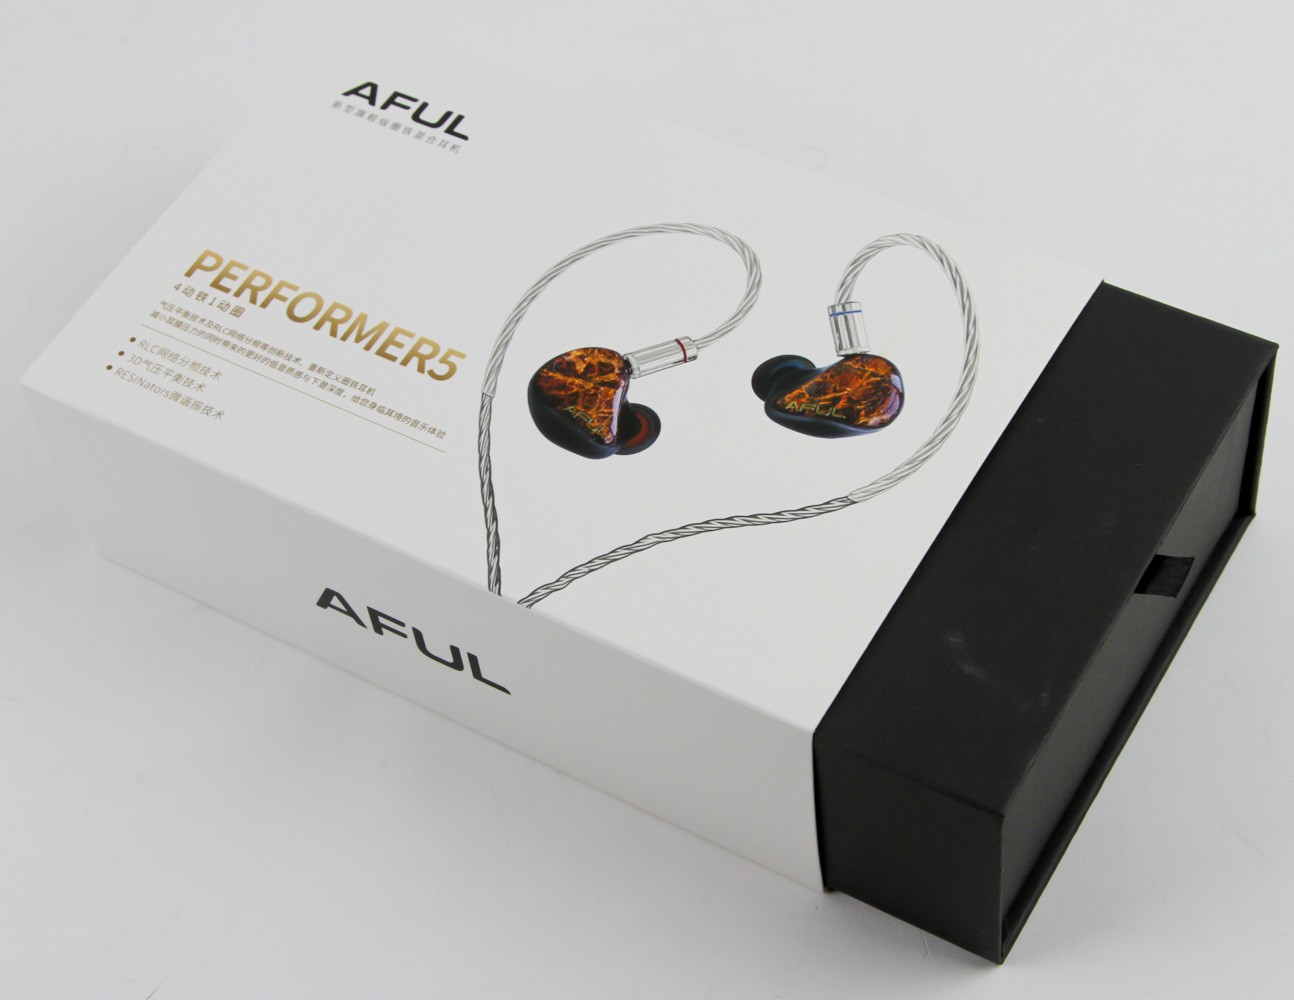 AFUL Acoustics Performer 5 In-Ear Monitors Review - Packaging